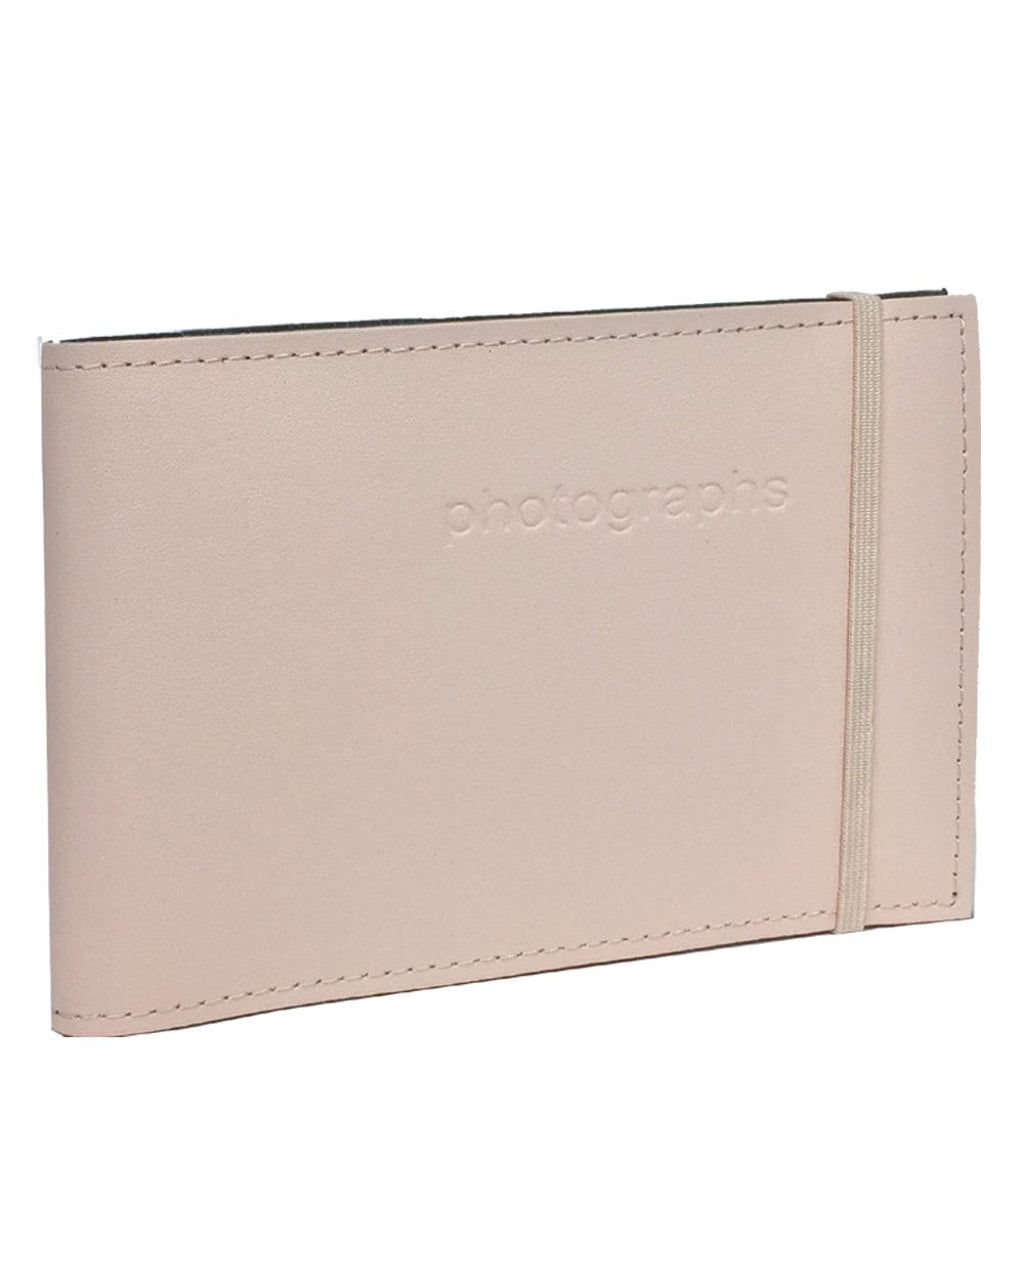 Citi Leather Musk Slip-in Bragbook Photo Album from our Photo Albums collection by Profile Products Australia